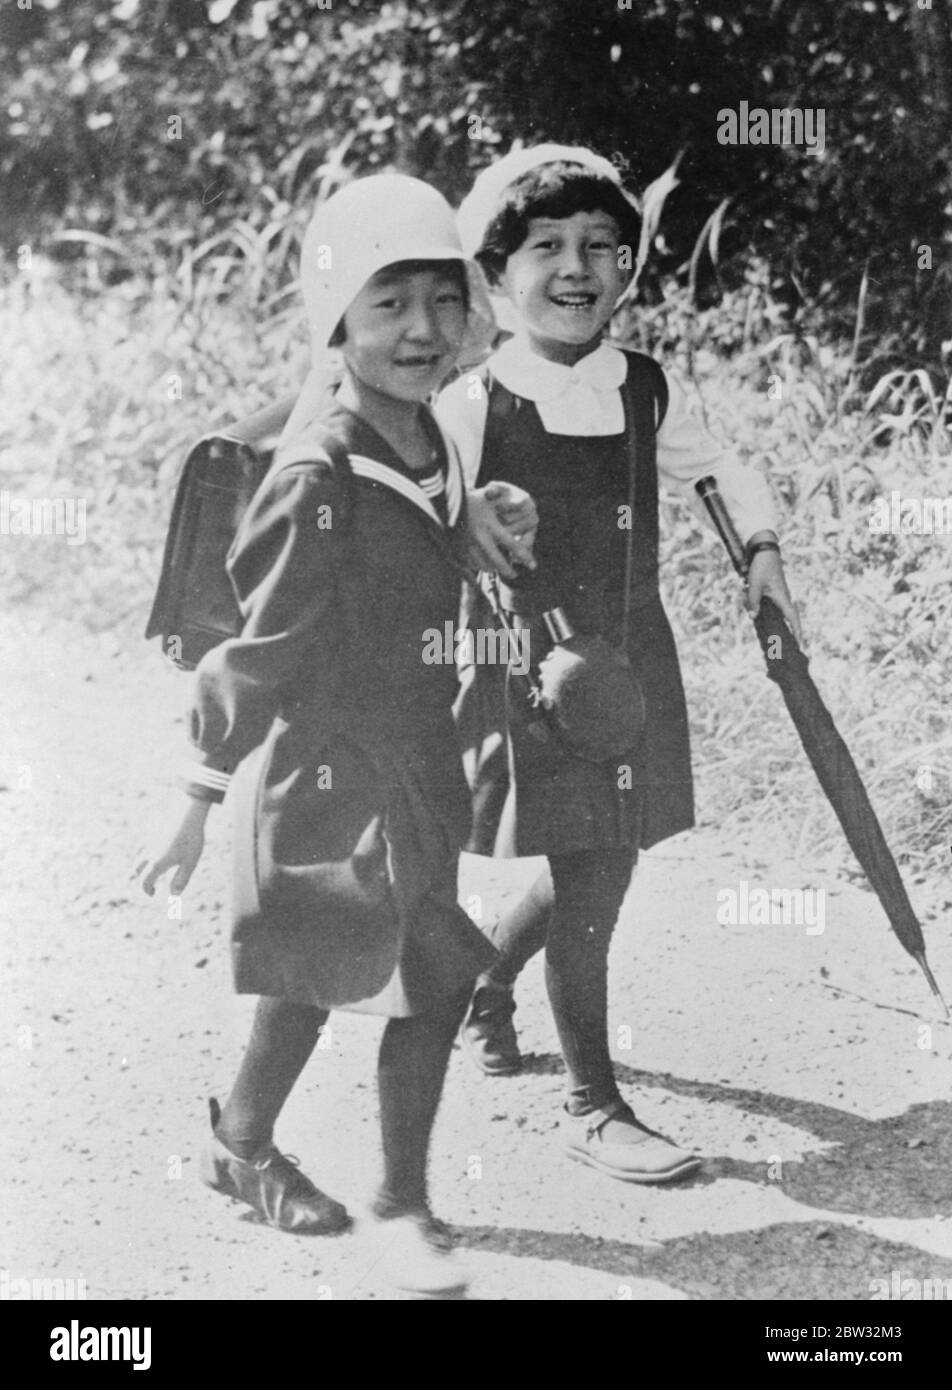 Japan ' s princess goes hiking . Princess Teru , the eldest daughter of the Emperor and Empress of Japan , who is a pupil a the Peeress ' s School near Tokyo , takes lessons and exercise with her school fellows without regard to her royal rank , and wears school uniform . Princess Teru ( left ) strolling along with a school fellow during a chestnut gathering walk . 8 November 1932 Stock Photo